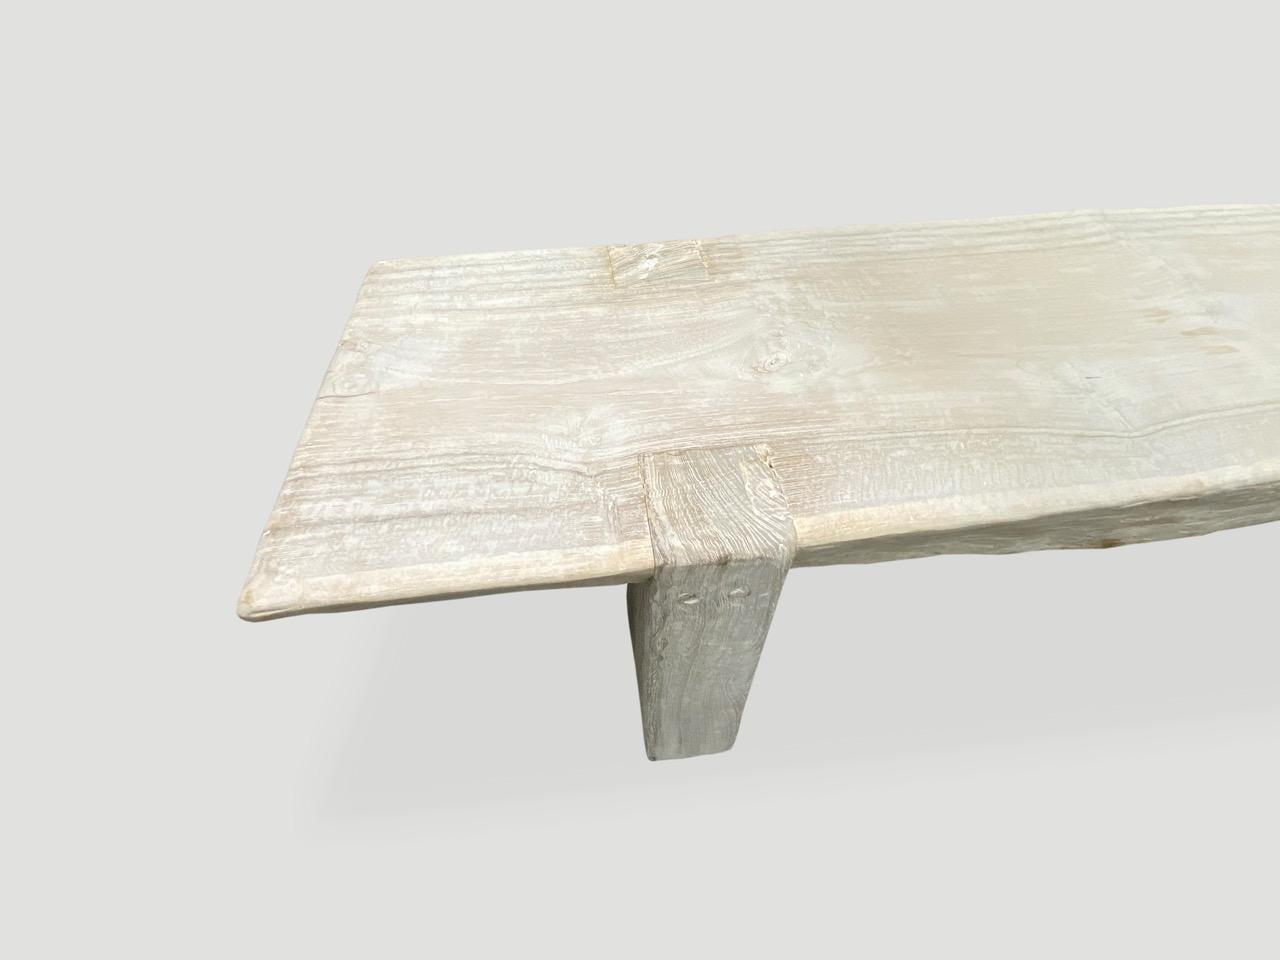 Andrianna Shamaris Bleached Teak Wood Long Bench In Excellent Condition For Sale In New York, NY